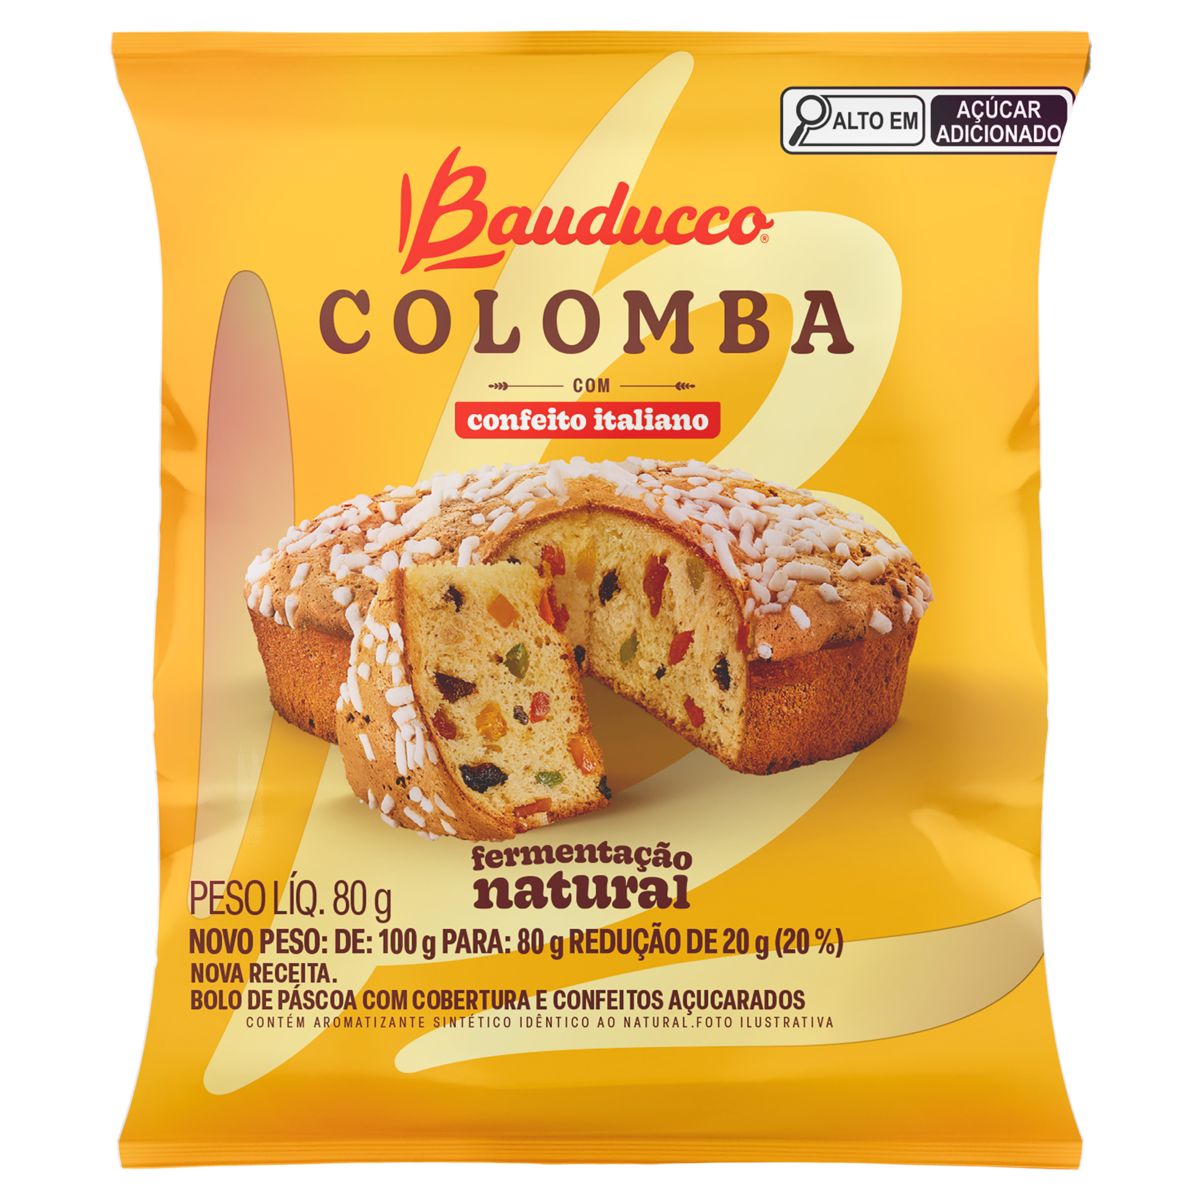 Colomba Bauducco Frutas Pacote 80g image number 0